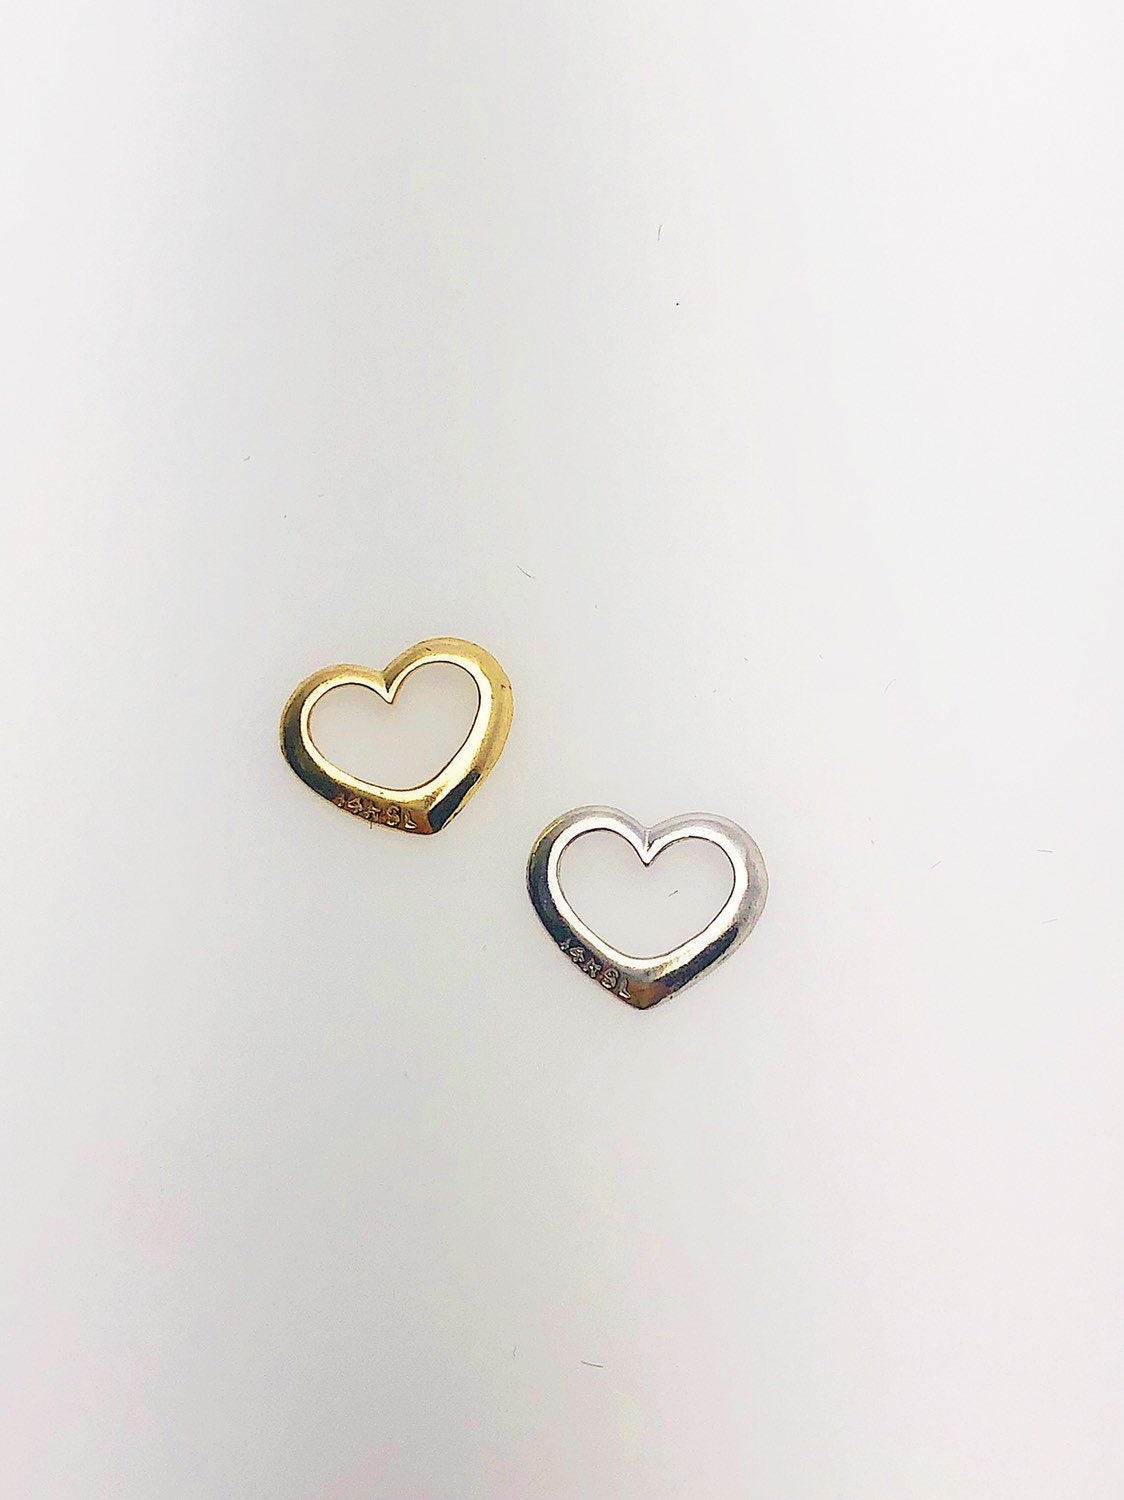 14K Solid Gold Heart Charm w/out Ring, 10.2x8.3mm, Made in USA (L-159)